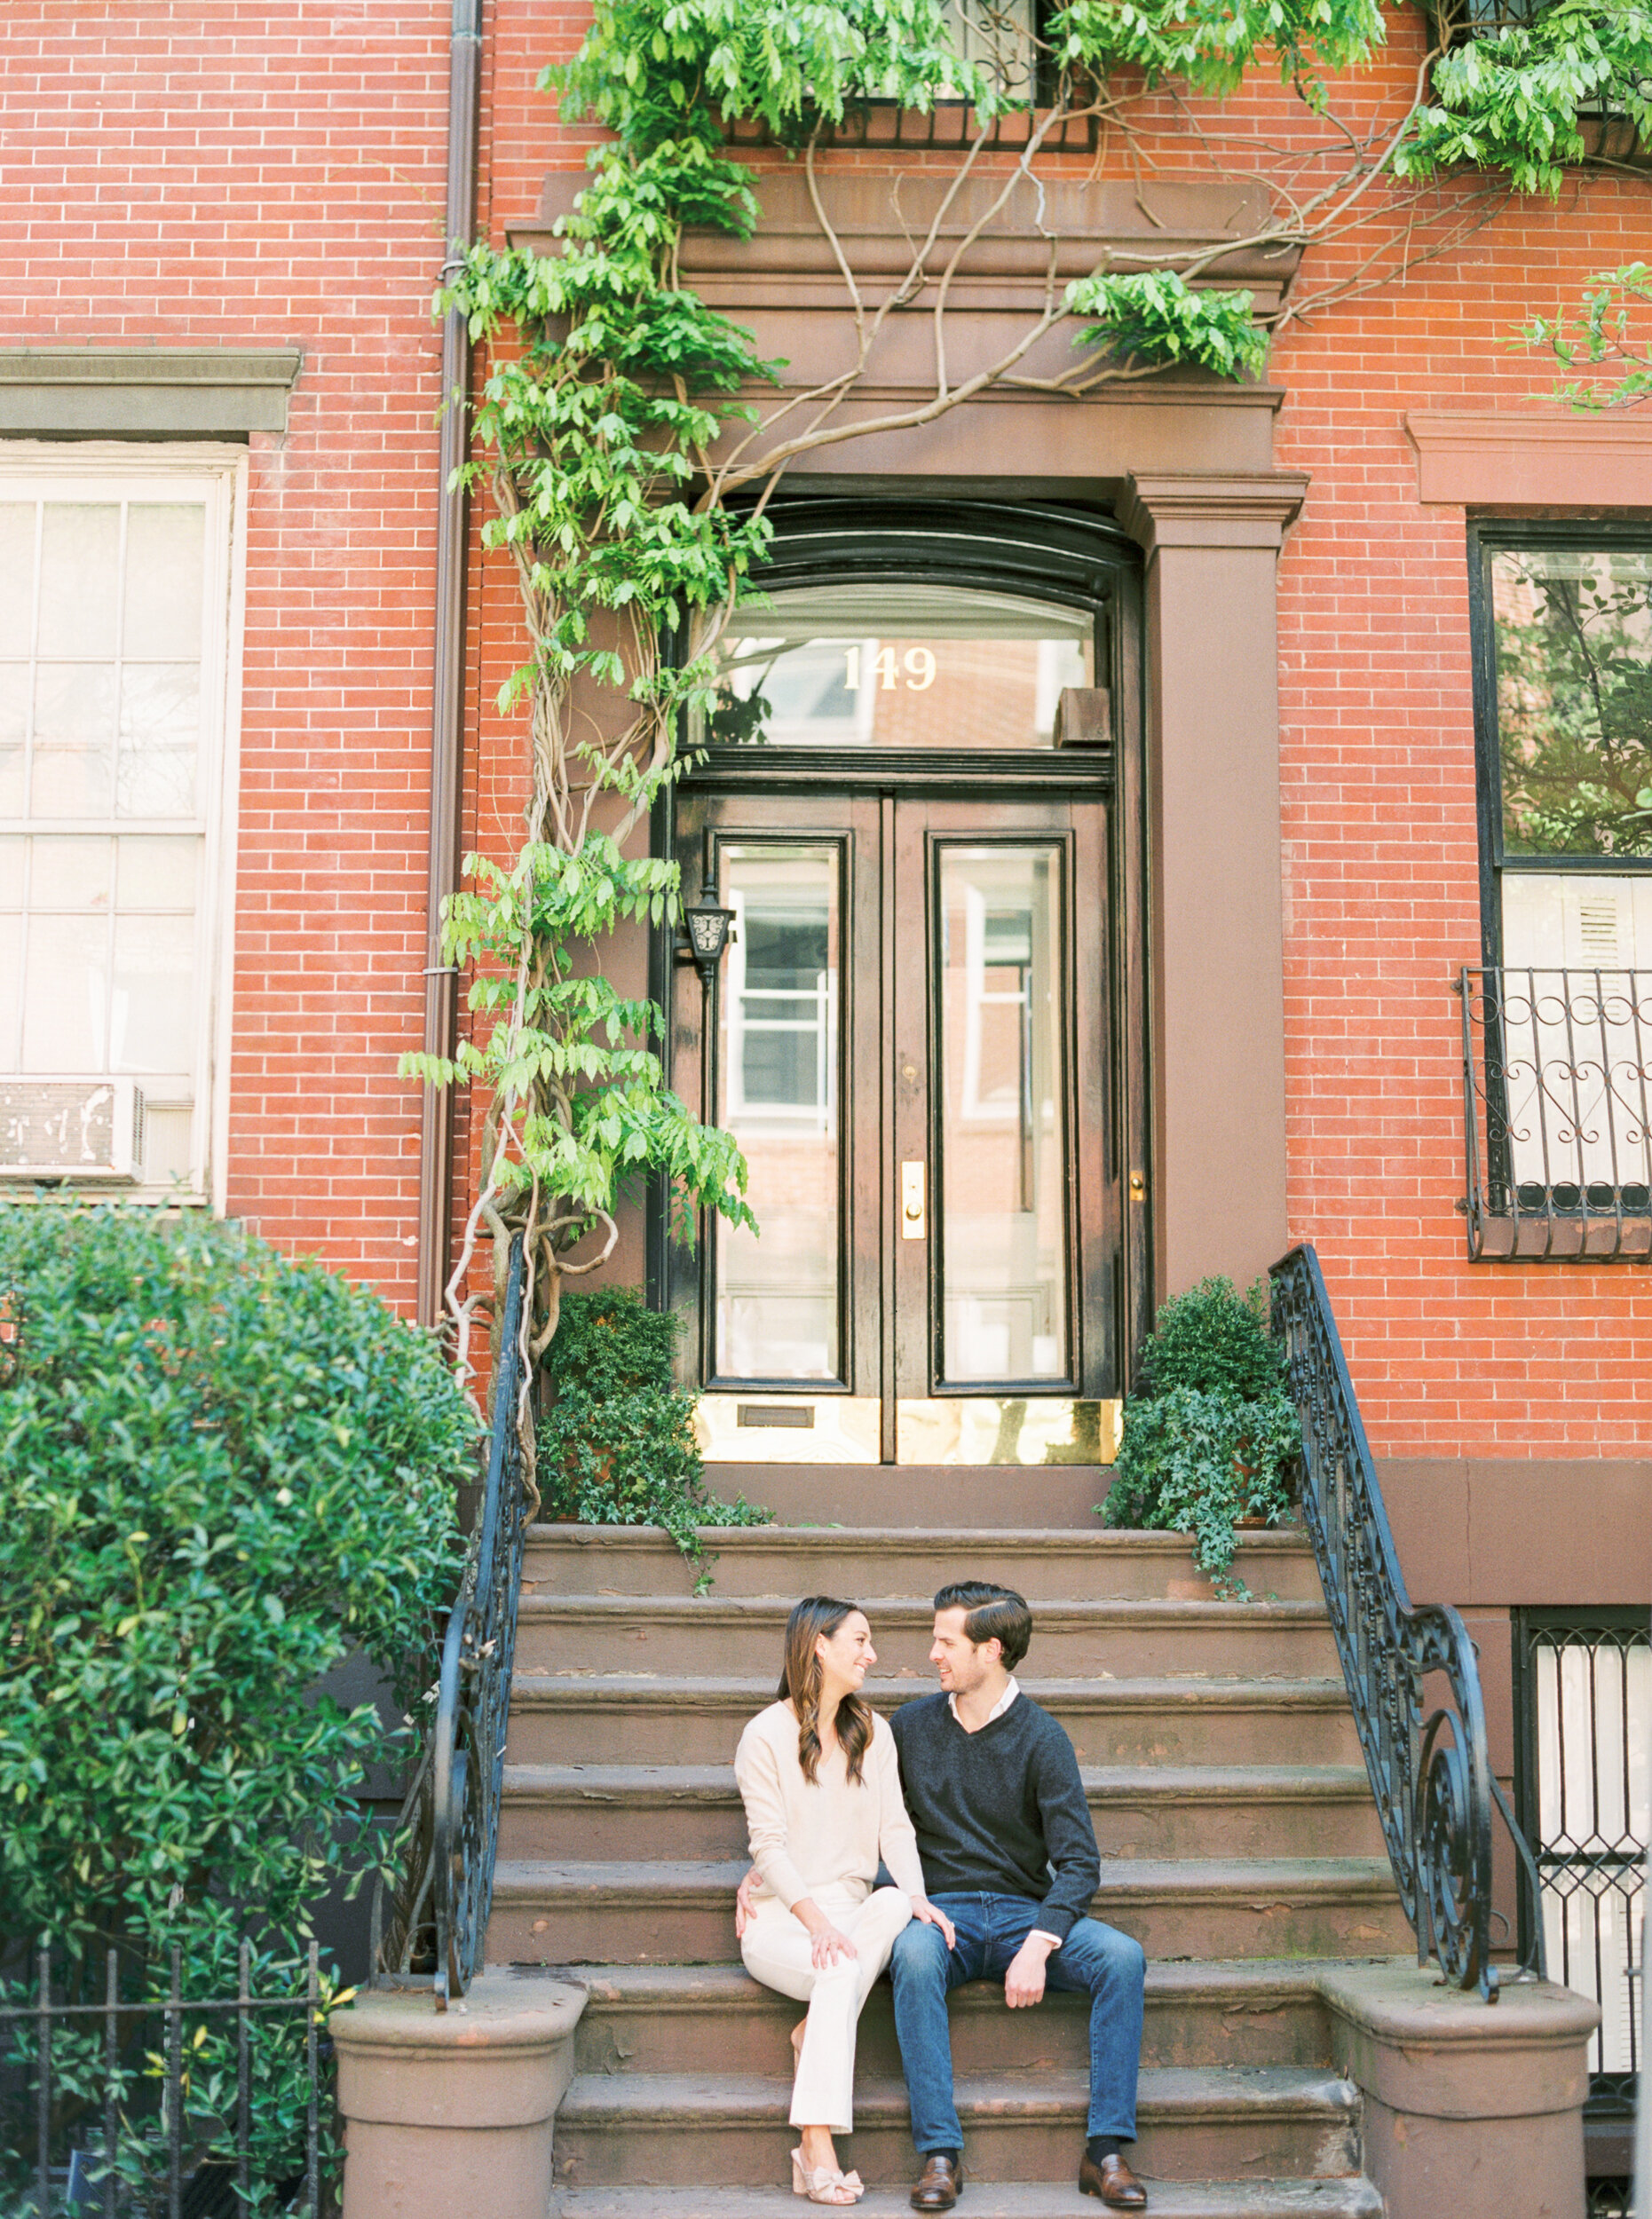 Brooklyn Engagement Photos in NYC